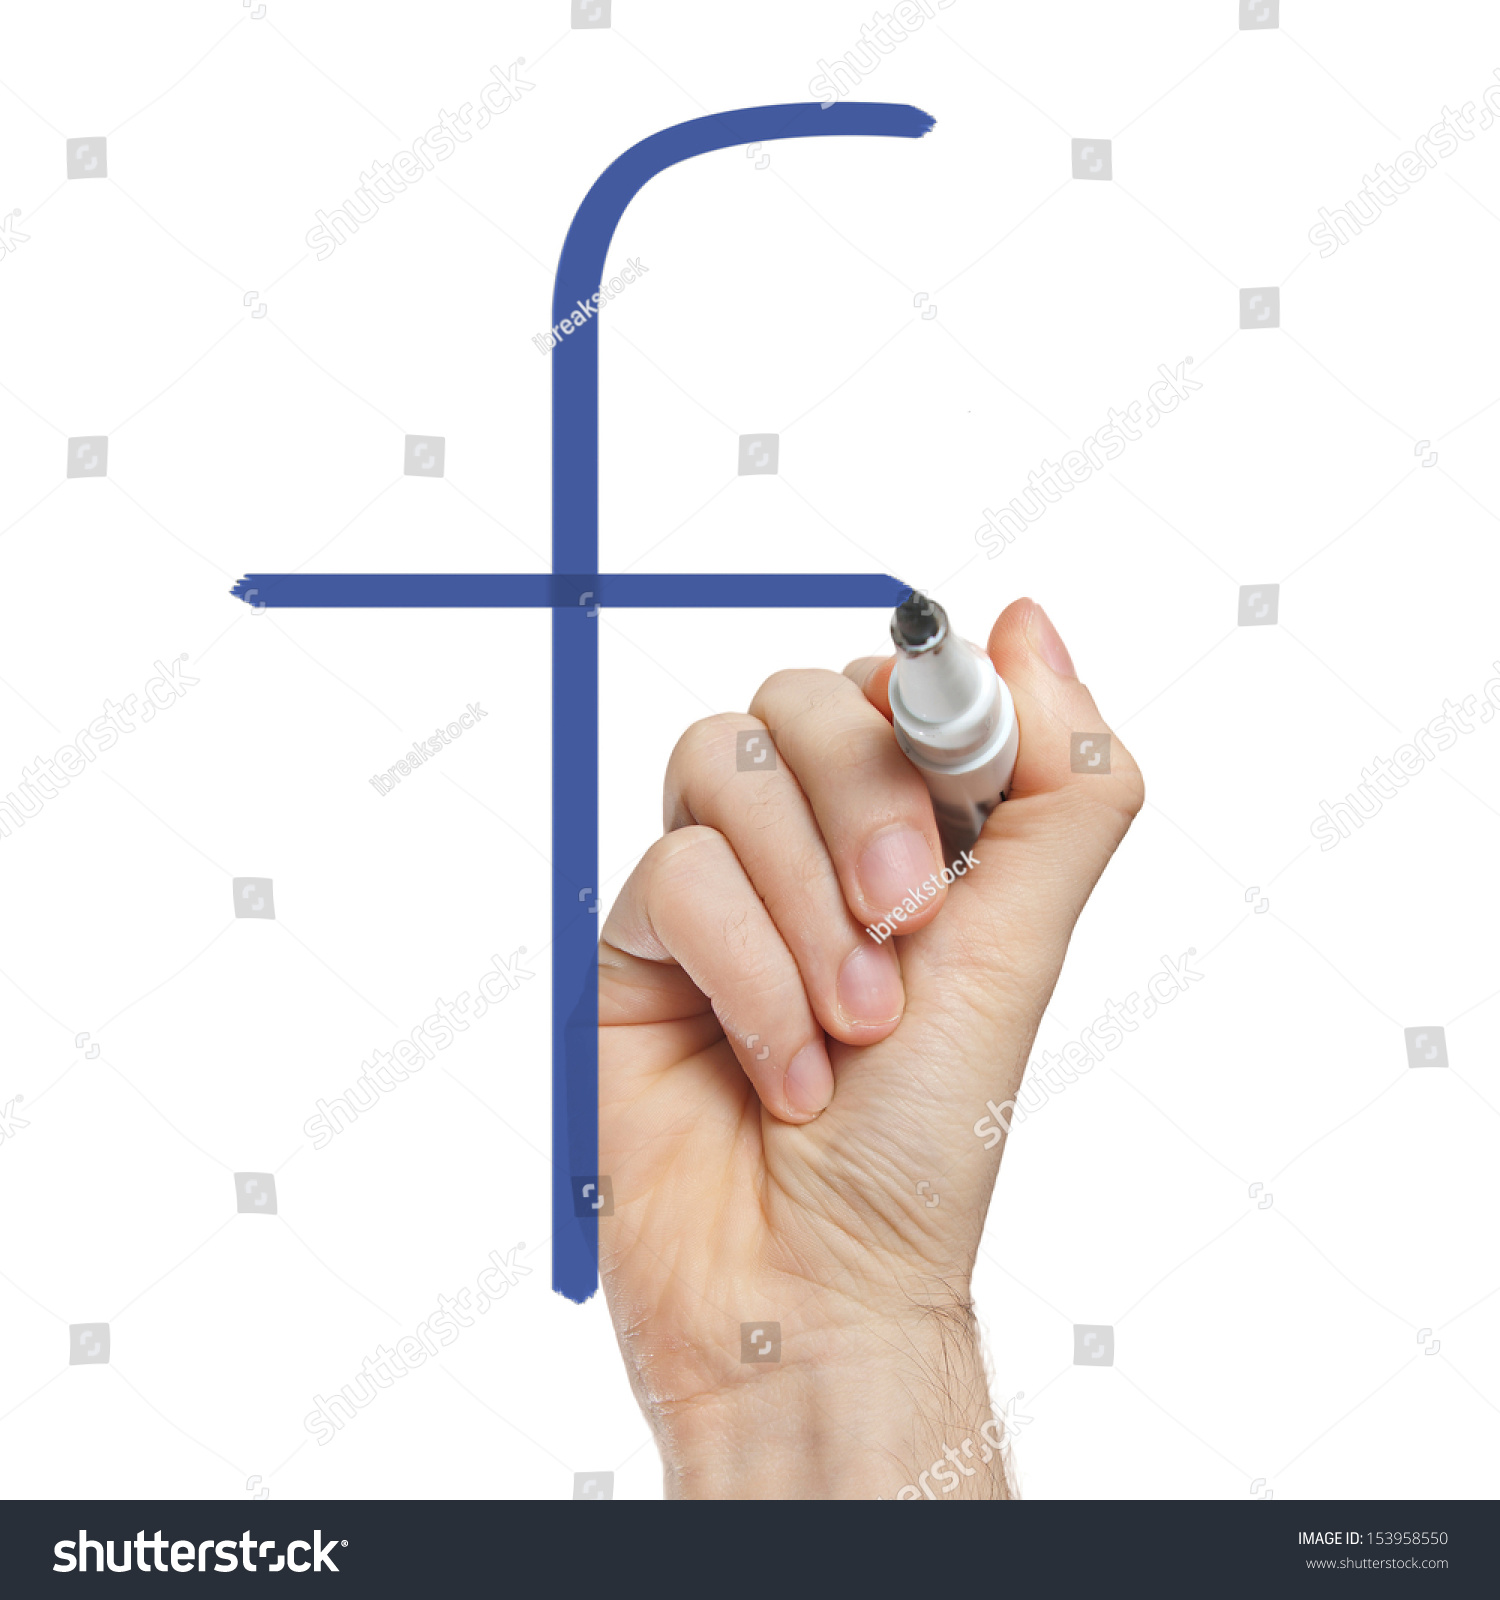 Hand writing letter f on whiteboard isolated on white #153958550